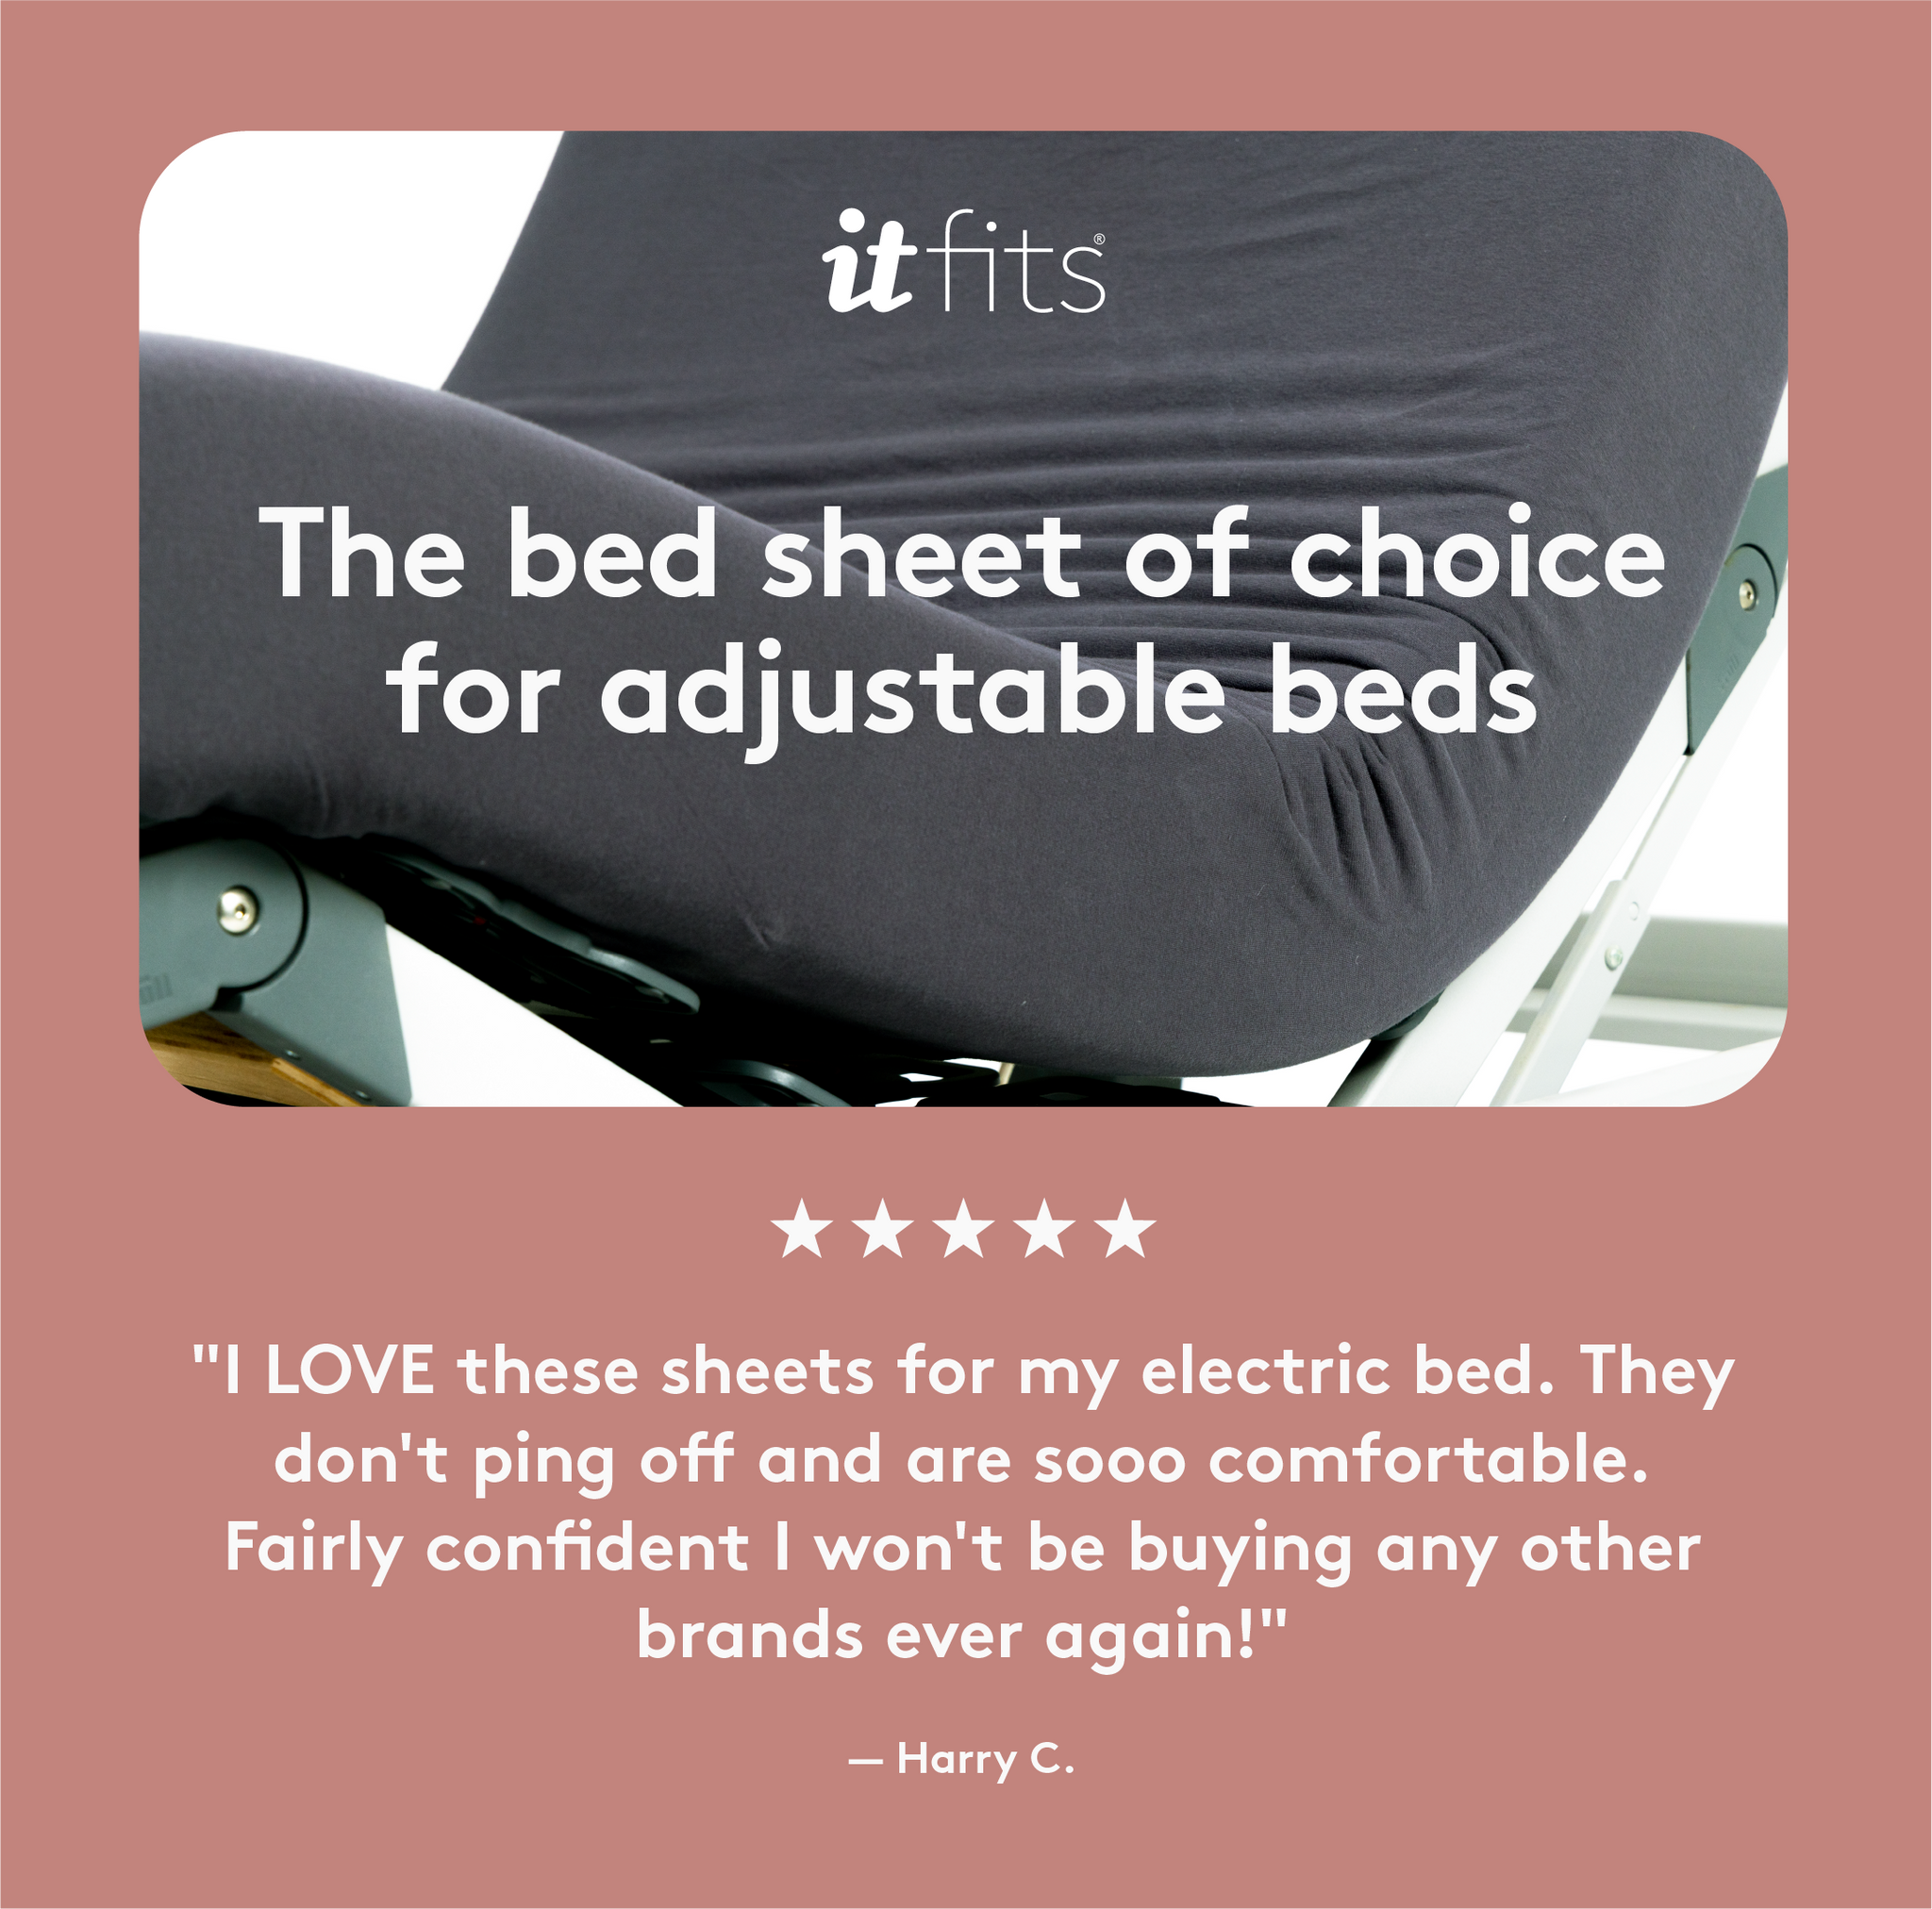 Experience Unmatched Comfort and Flexibility with It-fits Fitted Sheets for Adjustable Beds